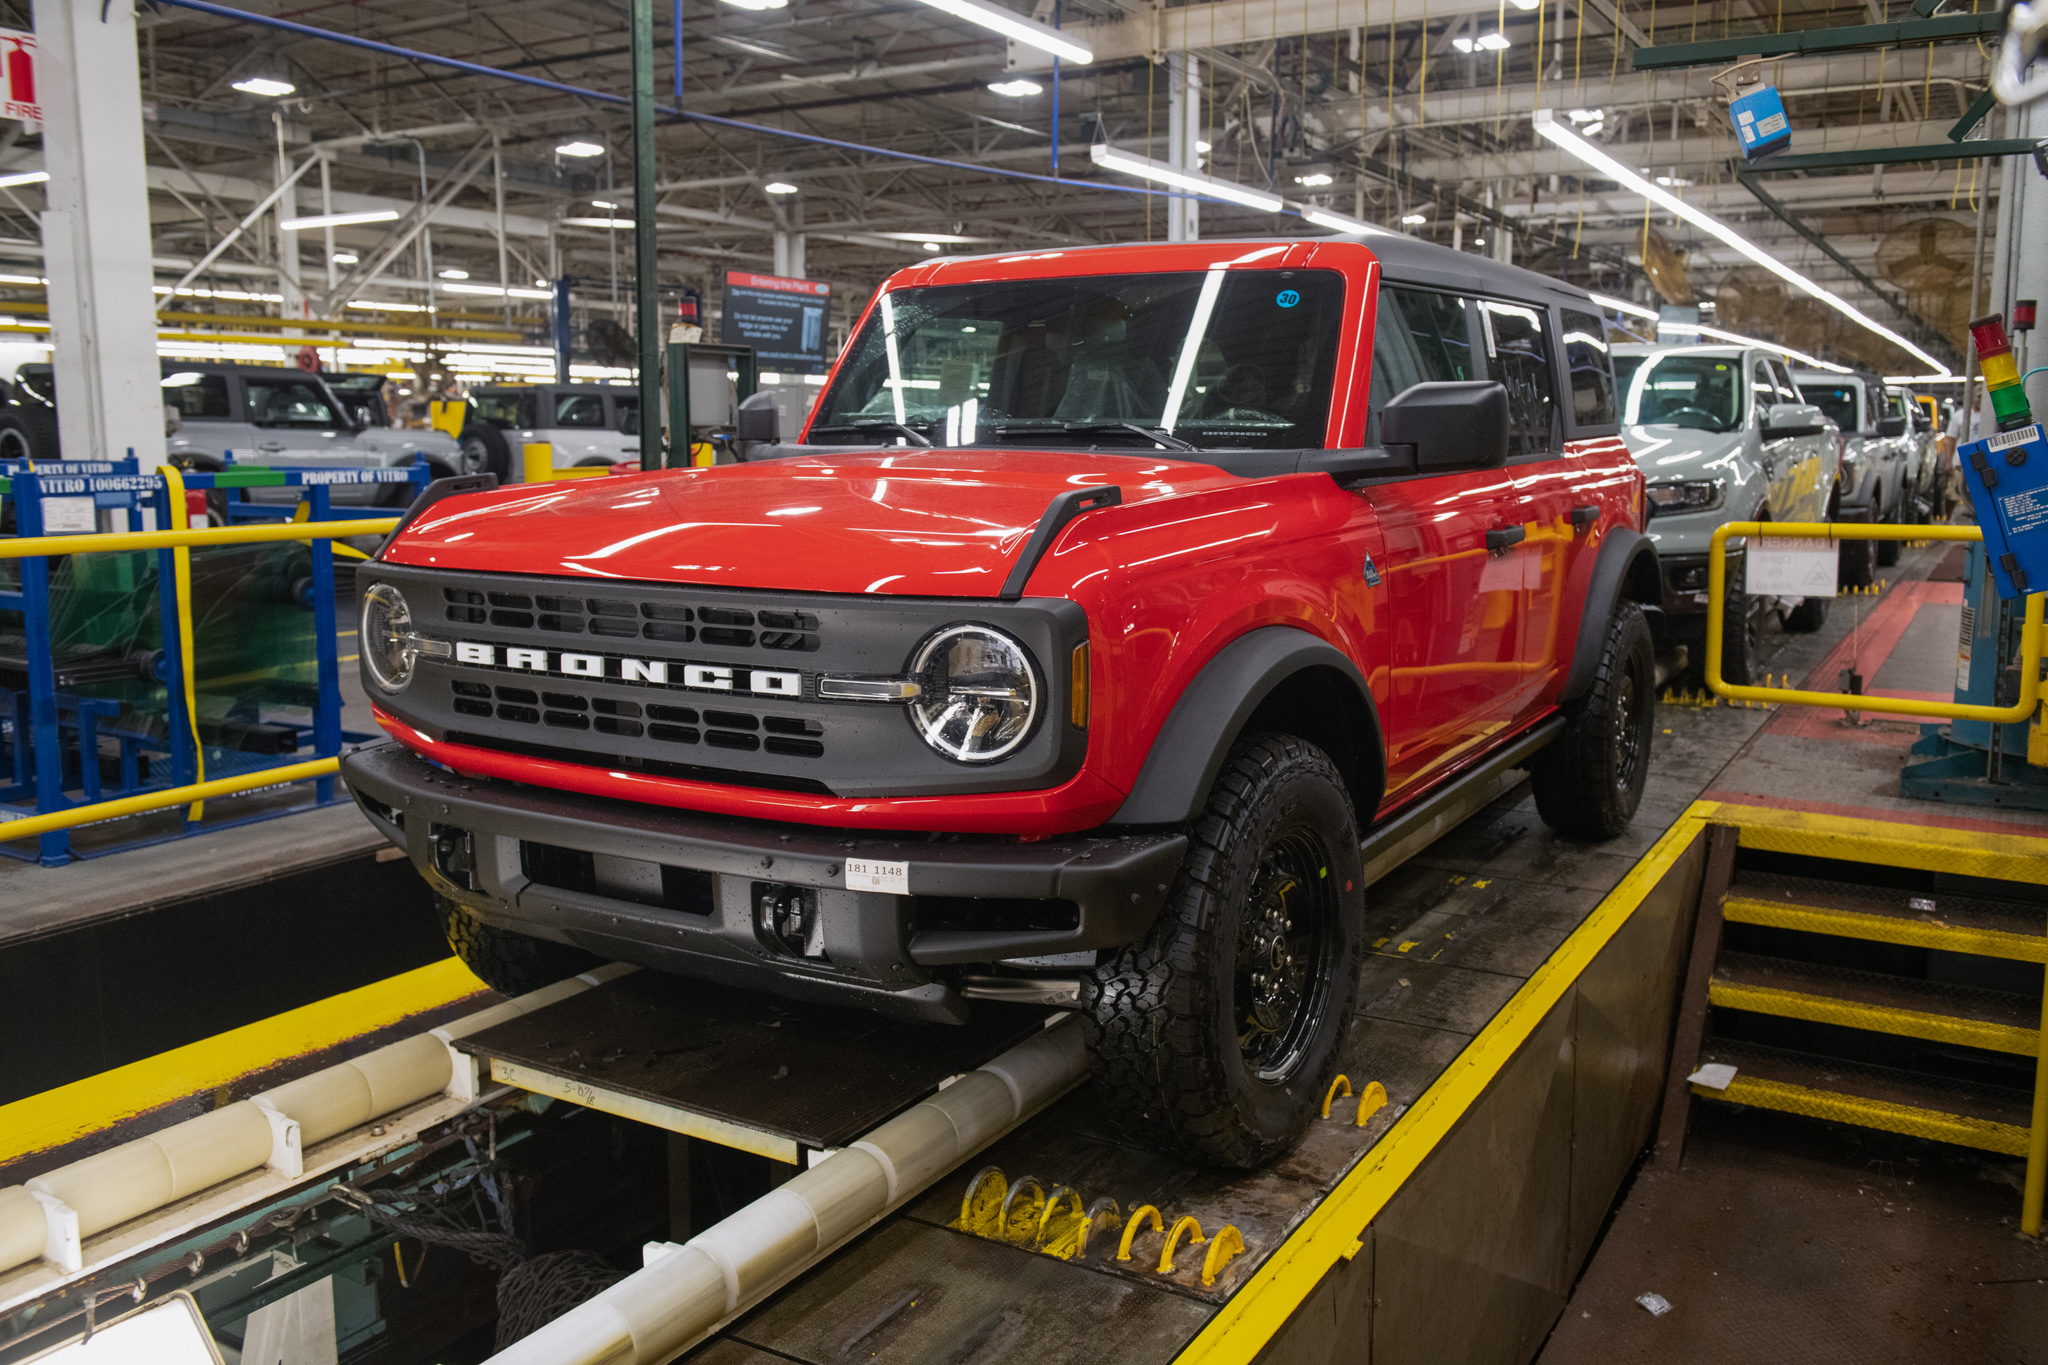 Ford Bronco Then & Now: show your assembly line Bronco and current Bronco picture PXL_20230528_185100342